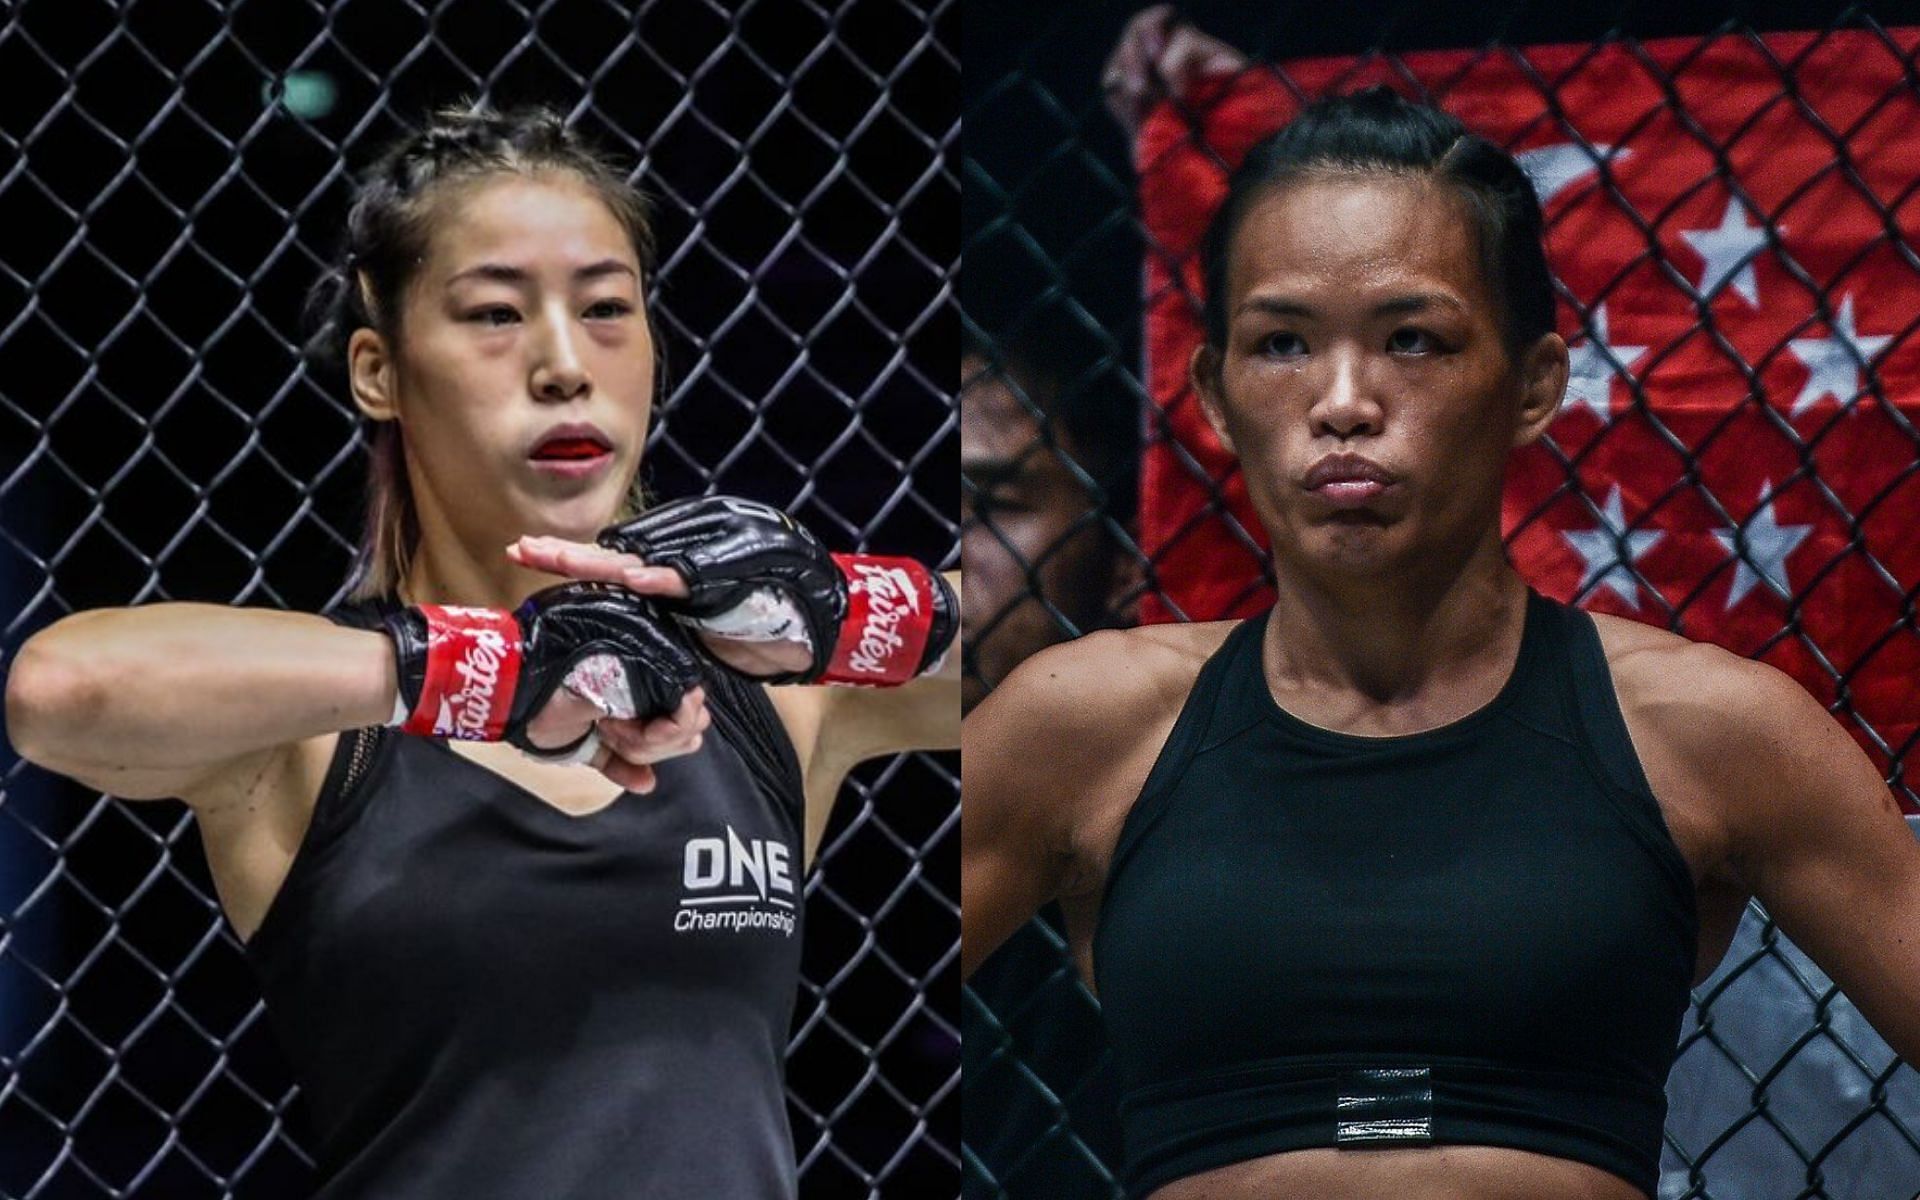 Tiffany Teo (right) claims Meng Bo (left) is not as tough as XJN | Photo: ONE Championship